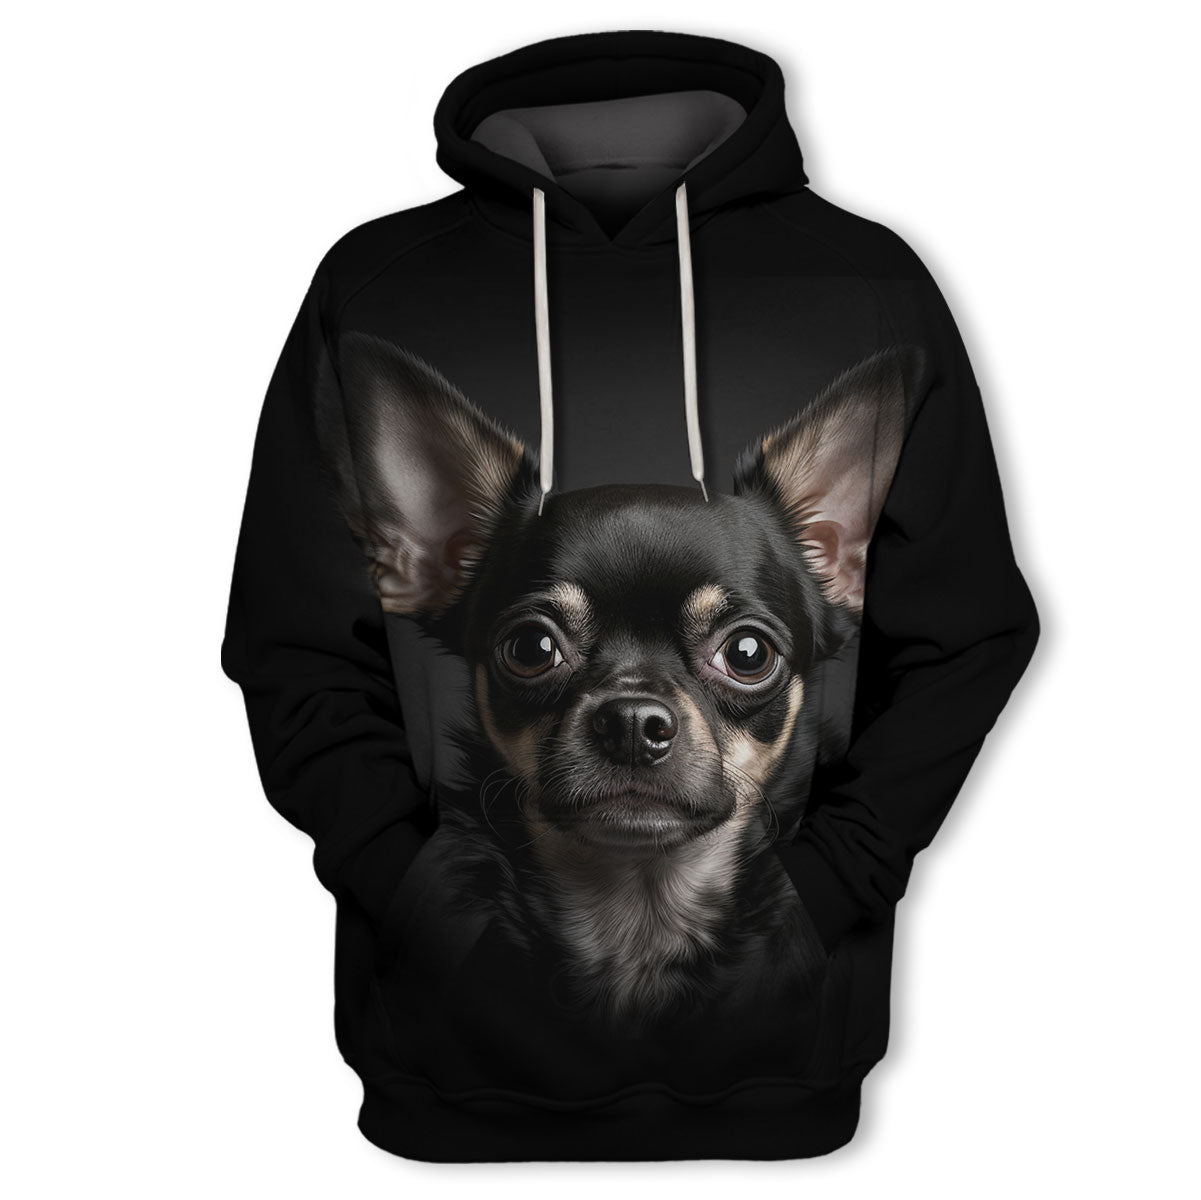 Chihuahua 4 - Unisex 3D Graphic Hoodie